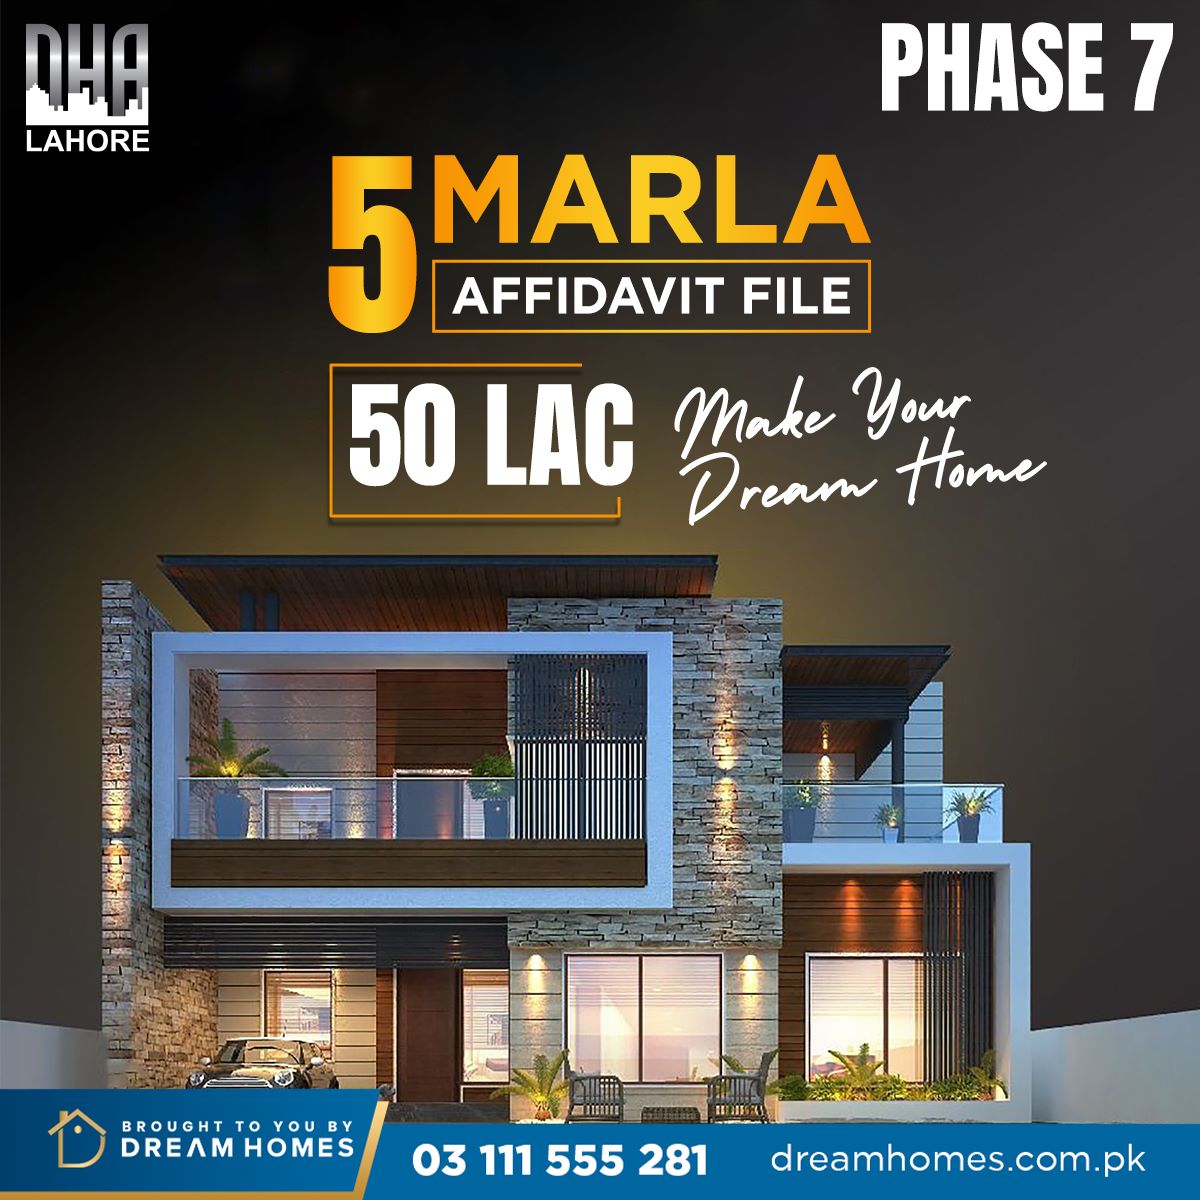 DHA Phase 7 Lahore